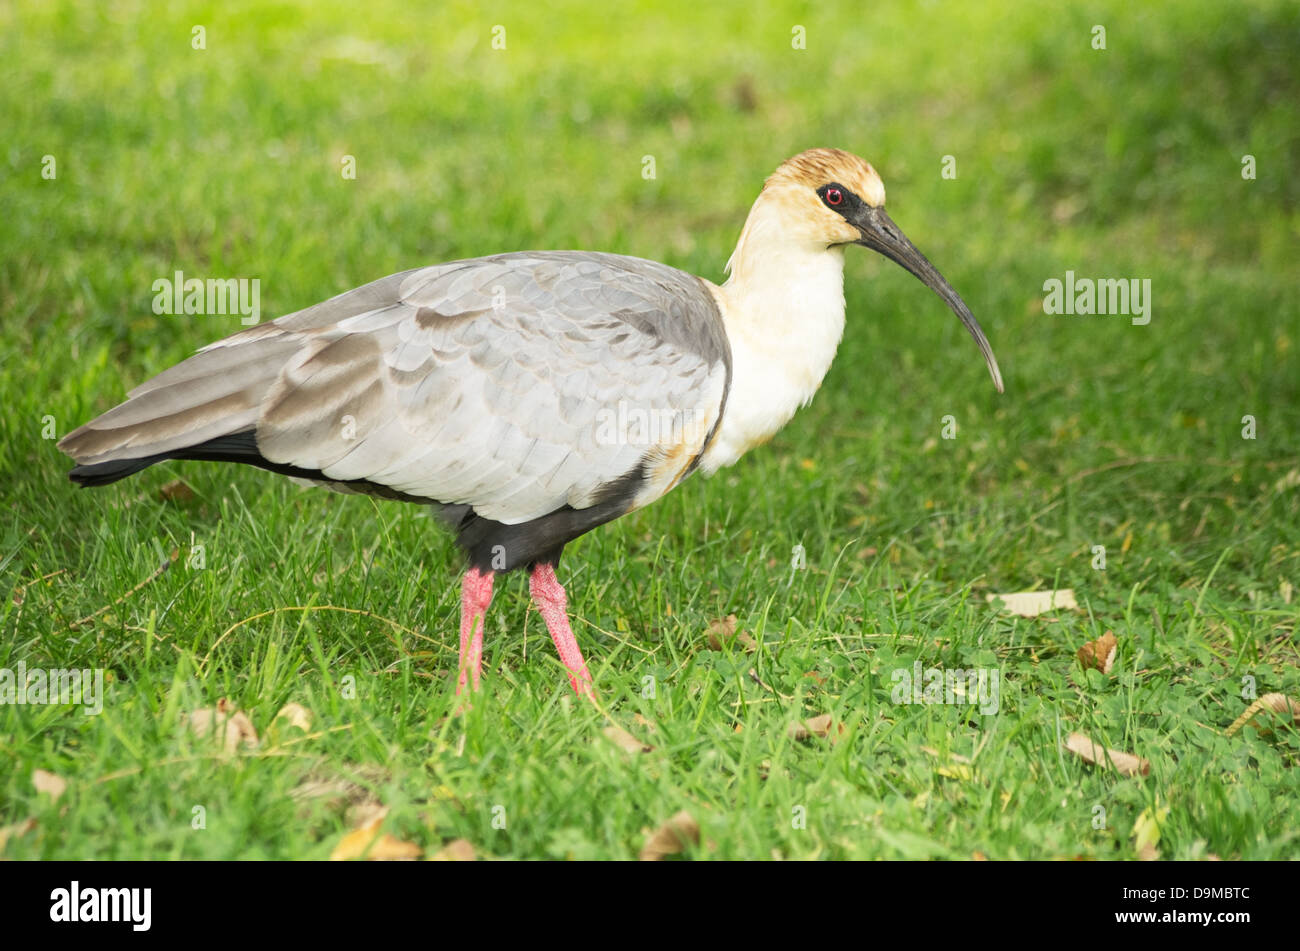 black faced ibis Theristicus melanopis standing on a grassy field Stock Photo